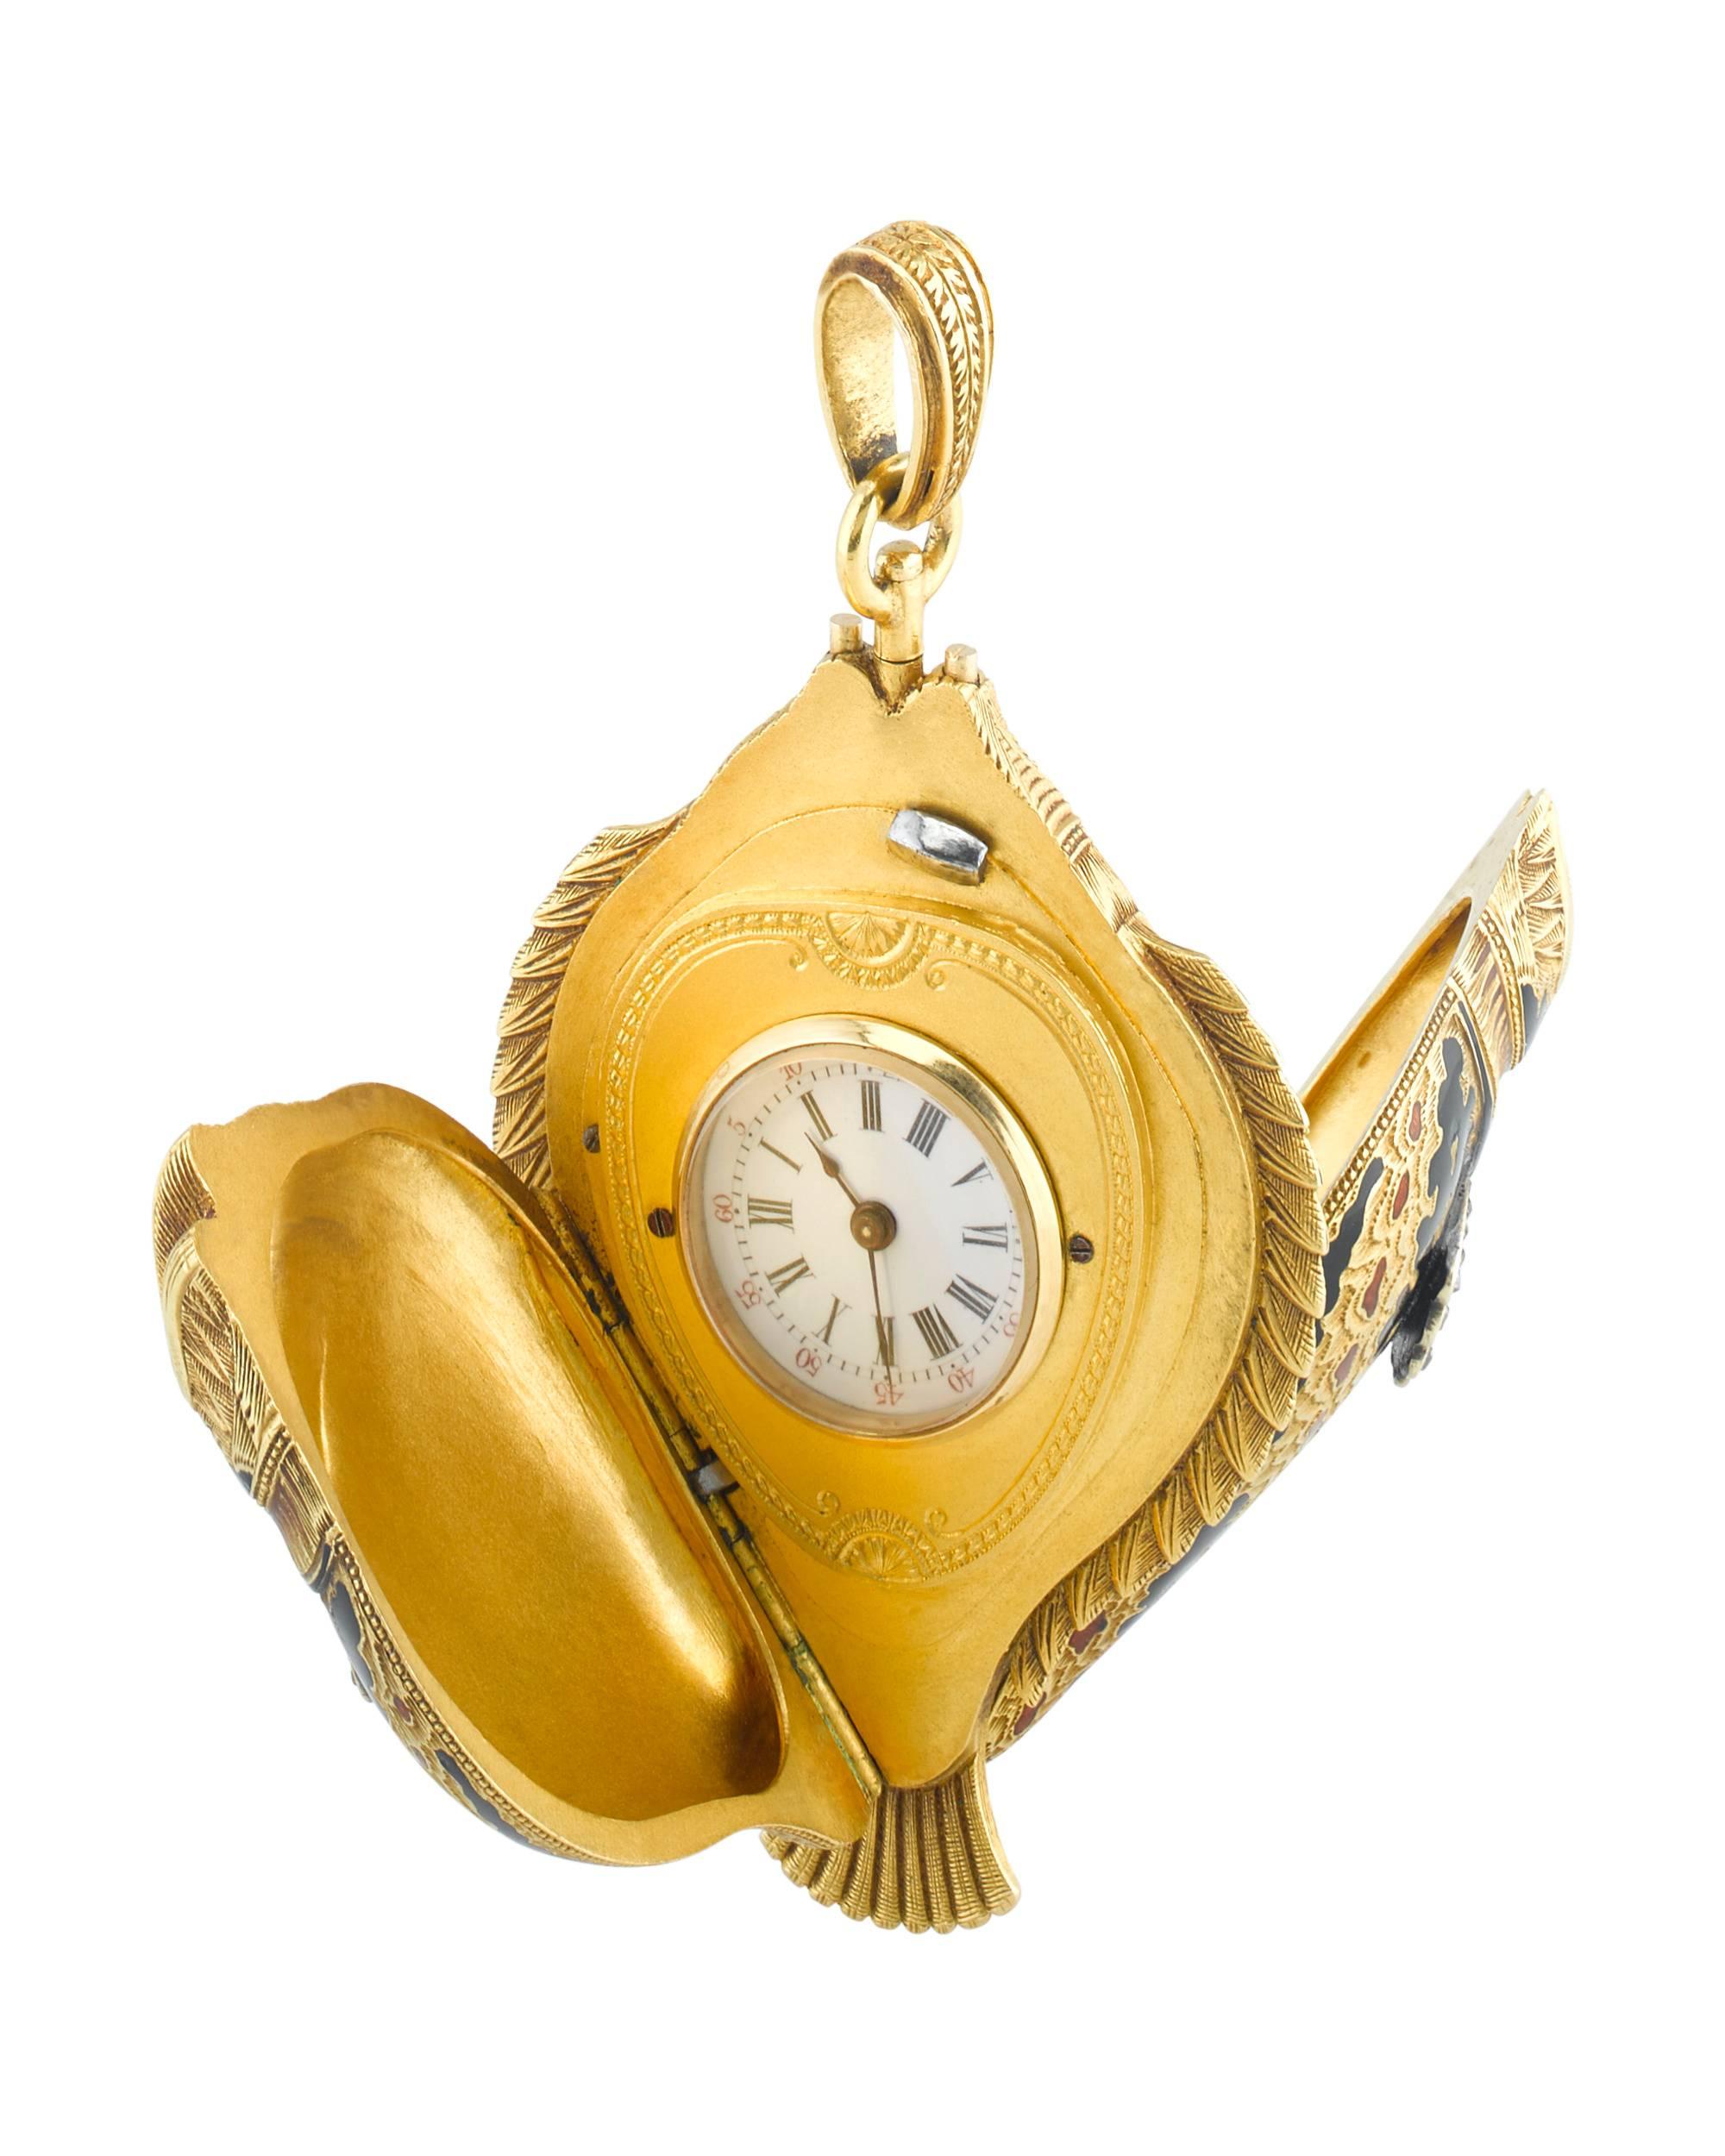 A delightful blend of watchmaking refinement and unique artistry, this charming lapel watch takes the form of a sunfish. The aquatic creature is stunning in its level of detail. Crafted from 18k yellow gold, each scale and fin is perfectly formed